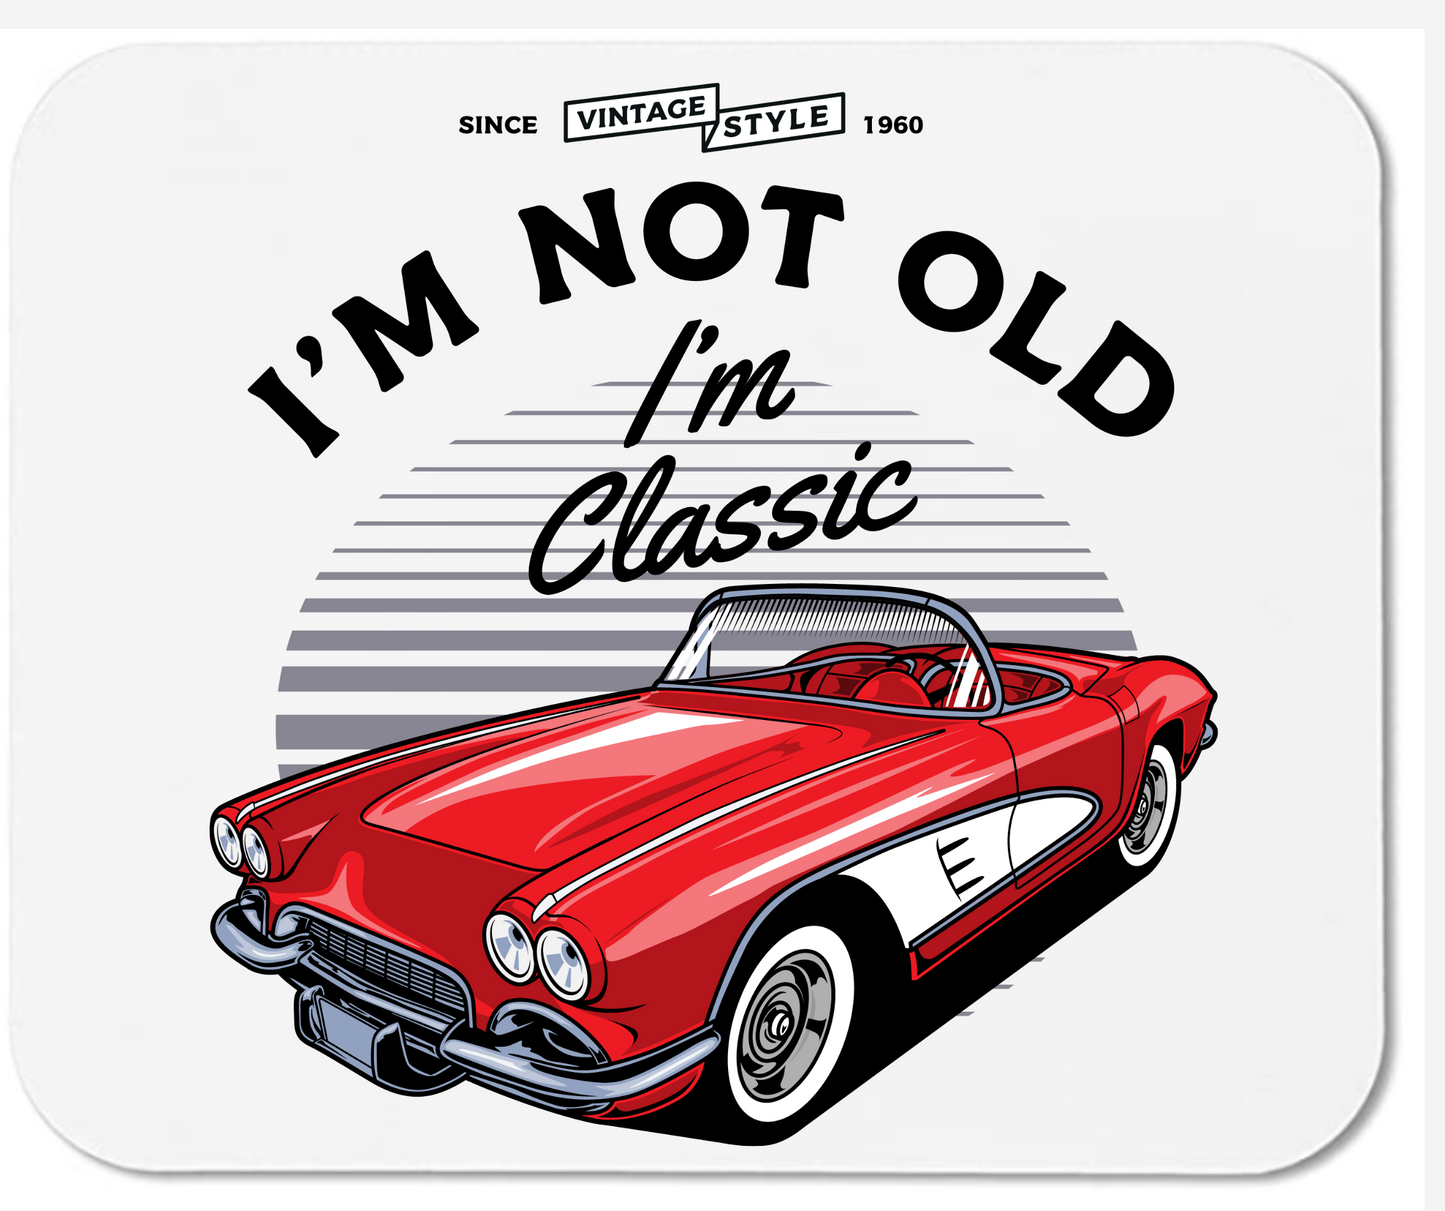 I'm Not Old, I'm Classic - Vette - Mouse Pad - Mister Snarky's